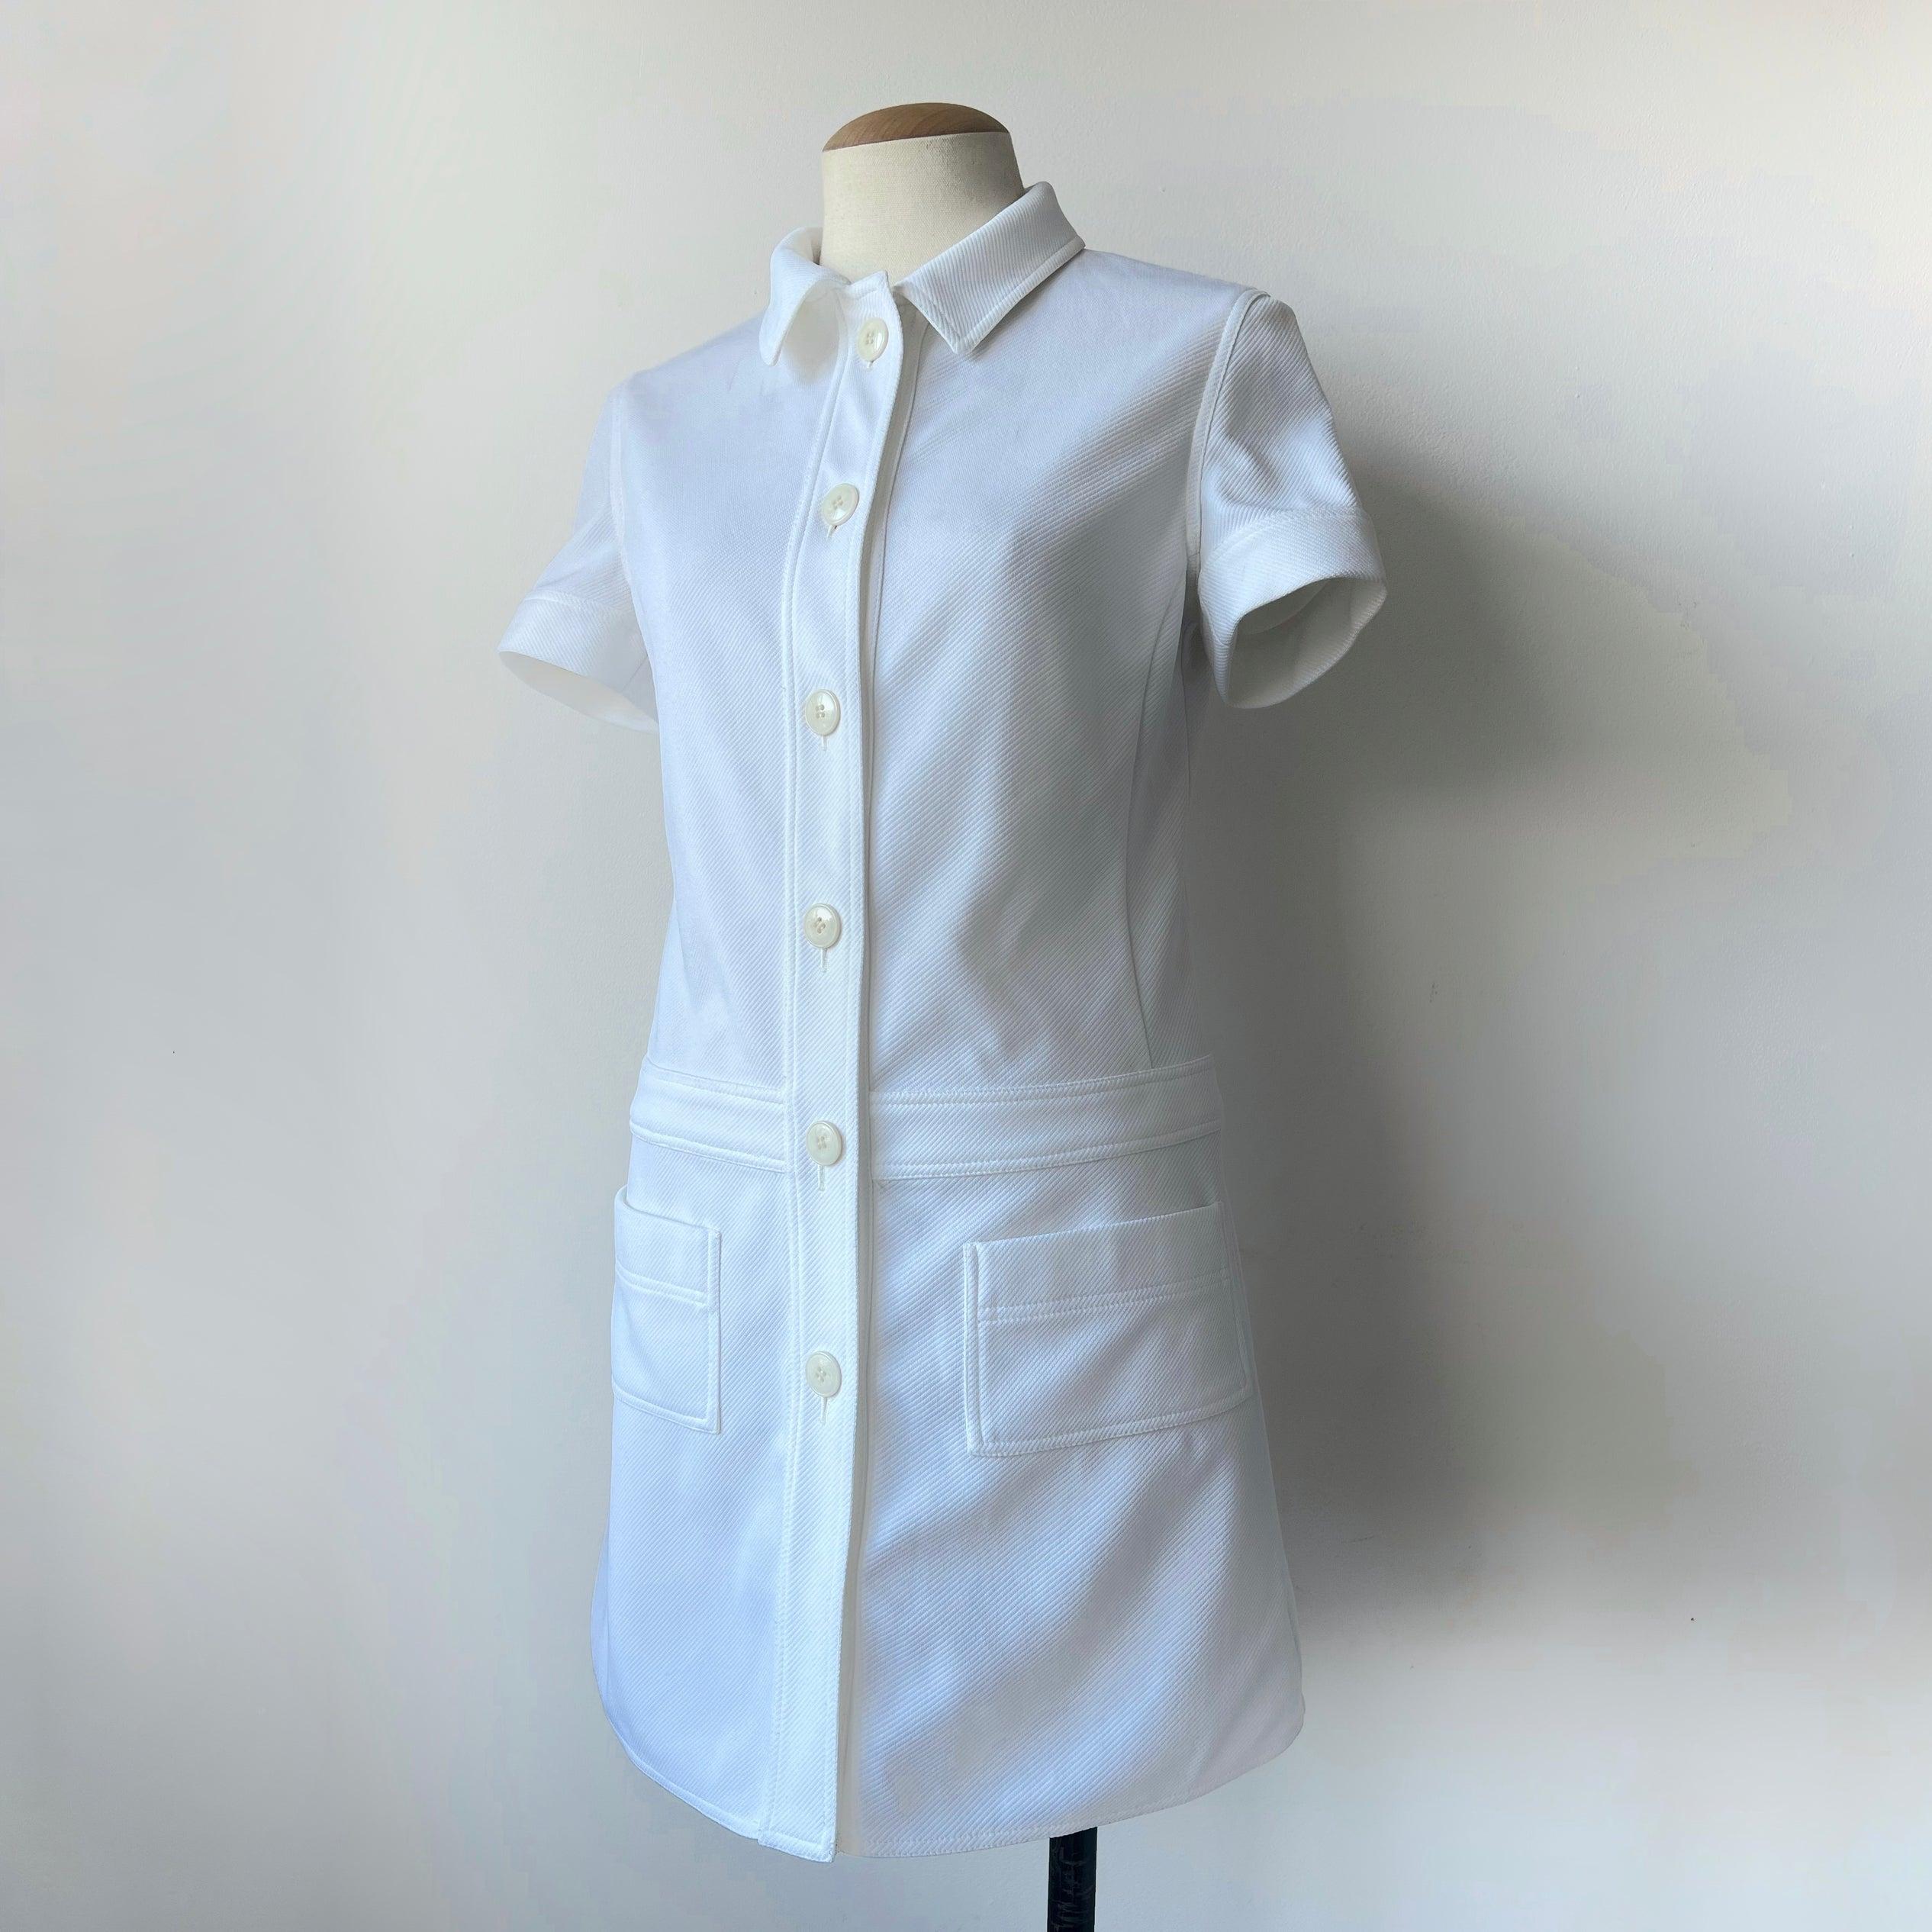 90's Miu Miu white button down dress. Very similar to look 36 of the 1996 runway collection. Which shows an open jacket. But this seems to be from a previous collection that Drew Barrymore modeled in  

Size: size label isn't available. But it fits